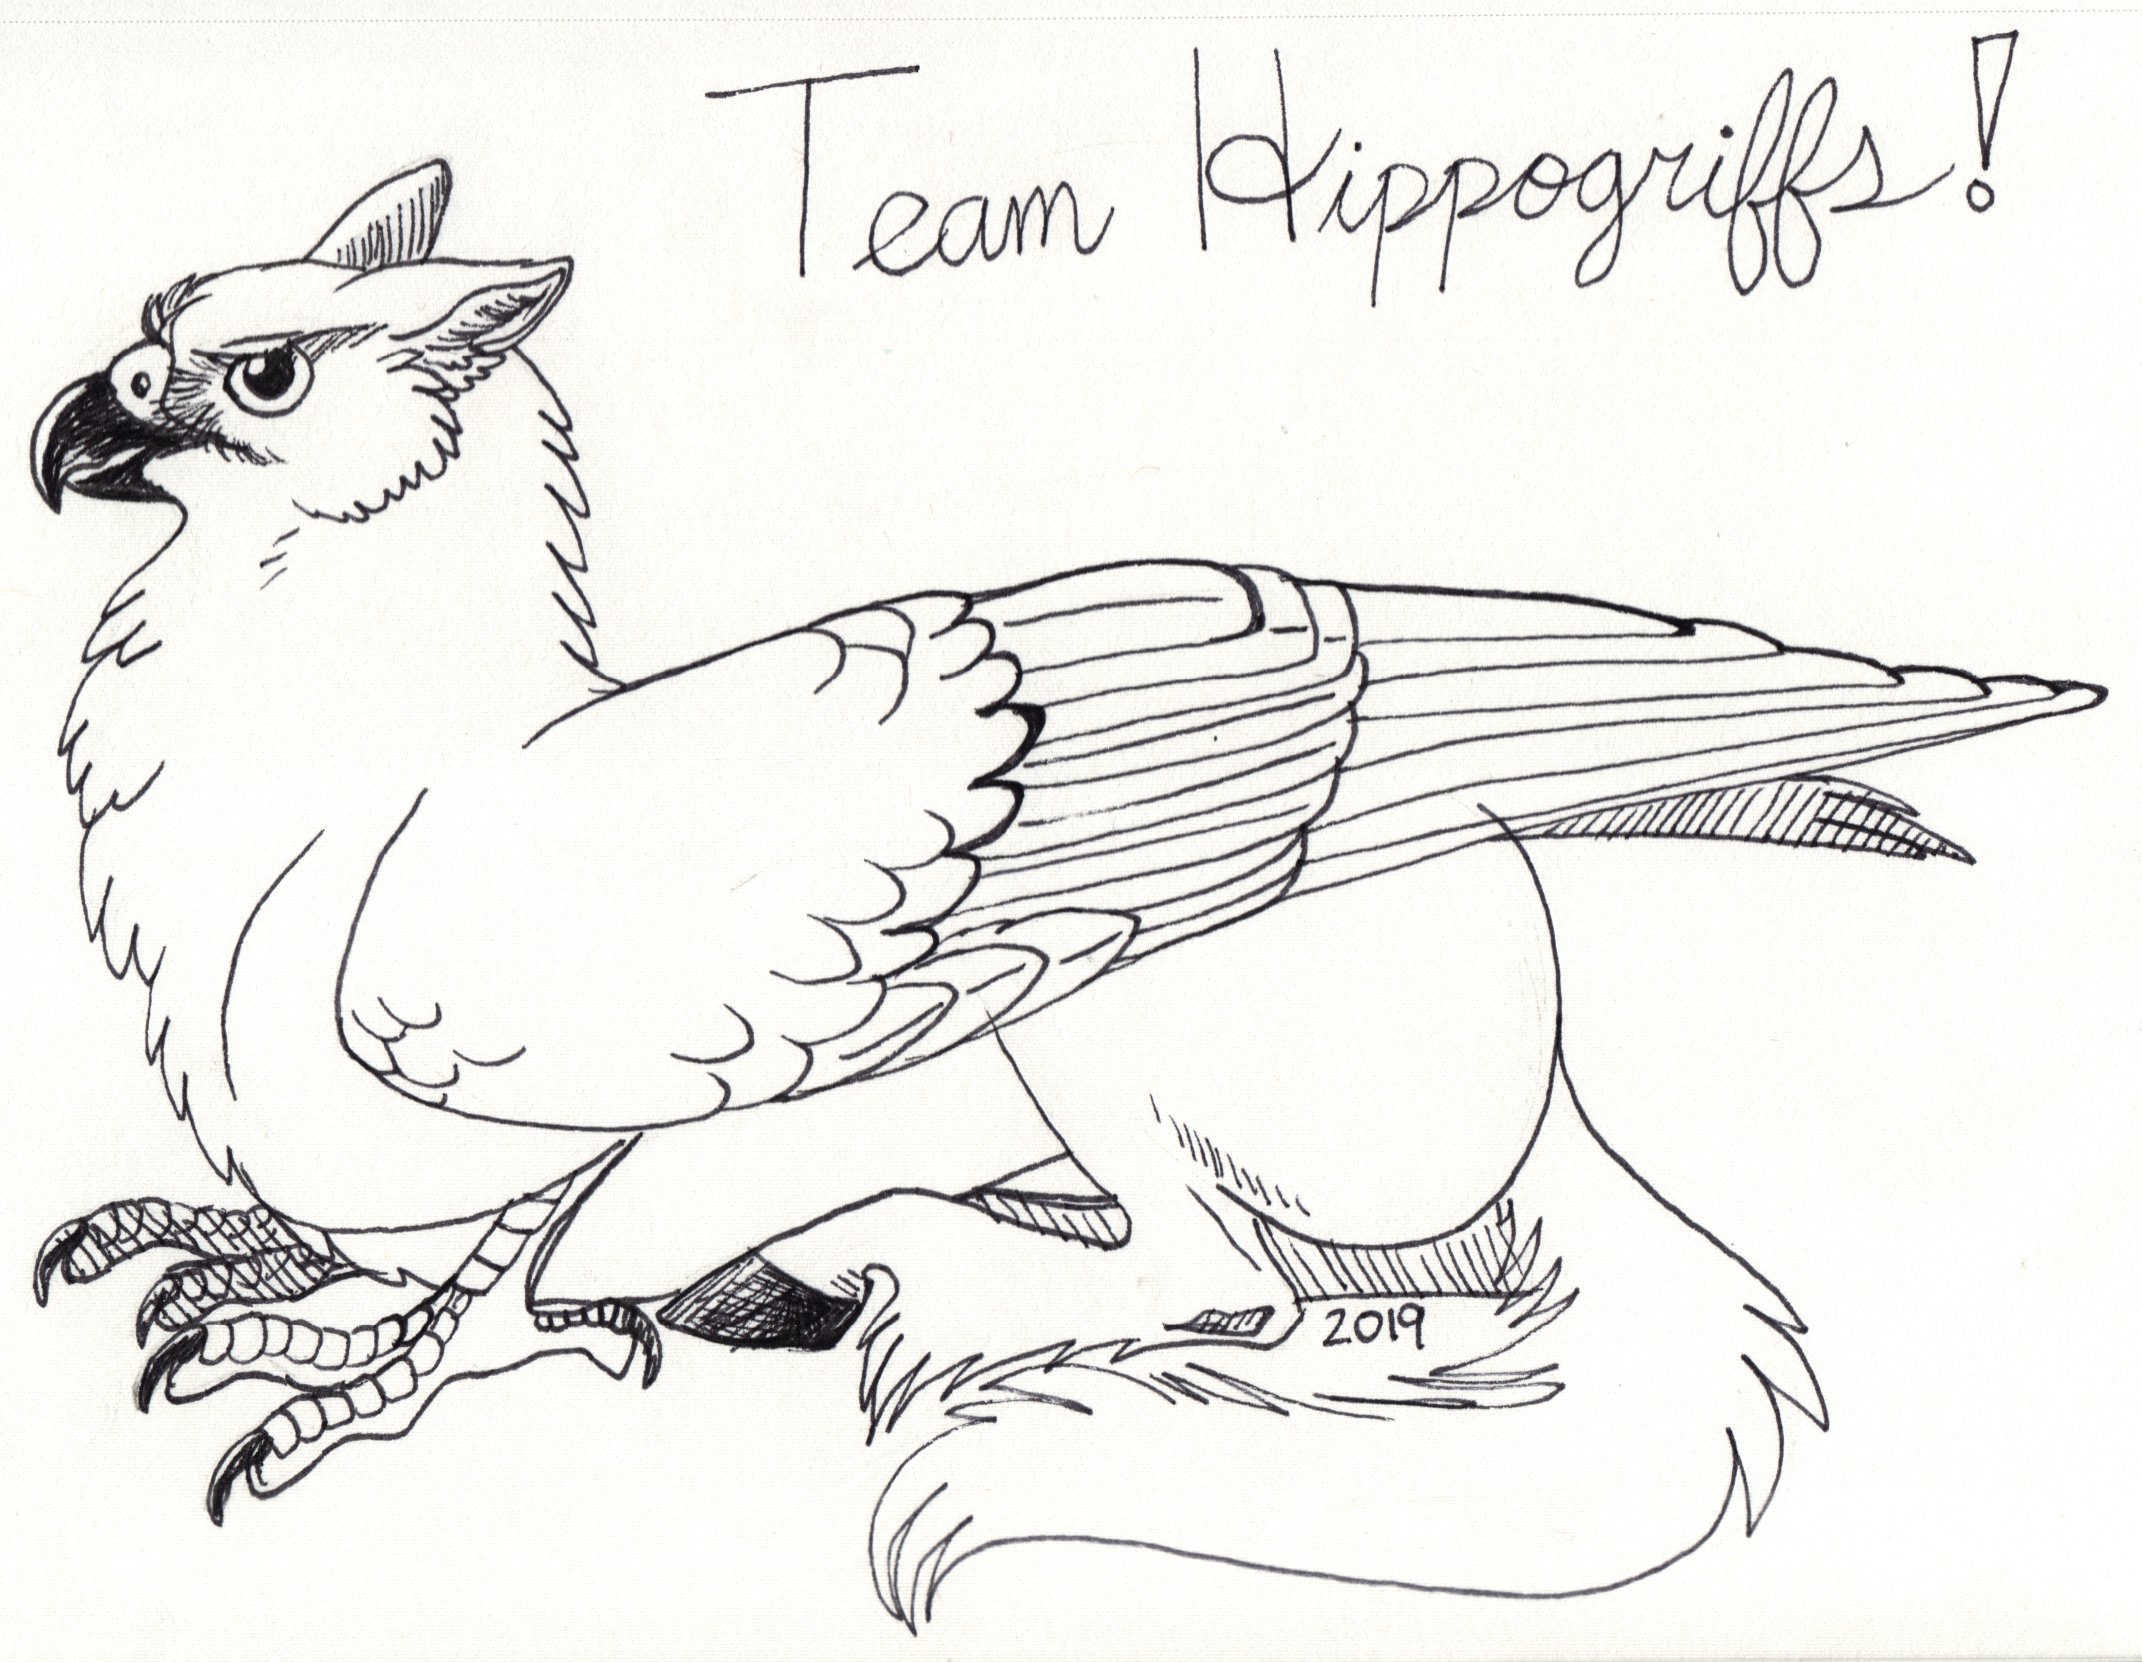 Diana muãoz on x so the rdavis mascot the hippogriff this year is only a close relative of one of my favorite mythological critters the gryphon obviously i had to draw one